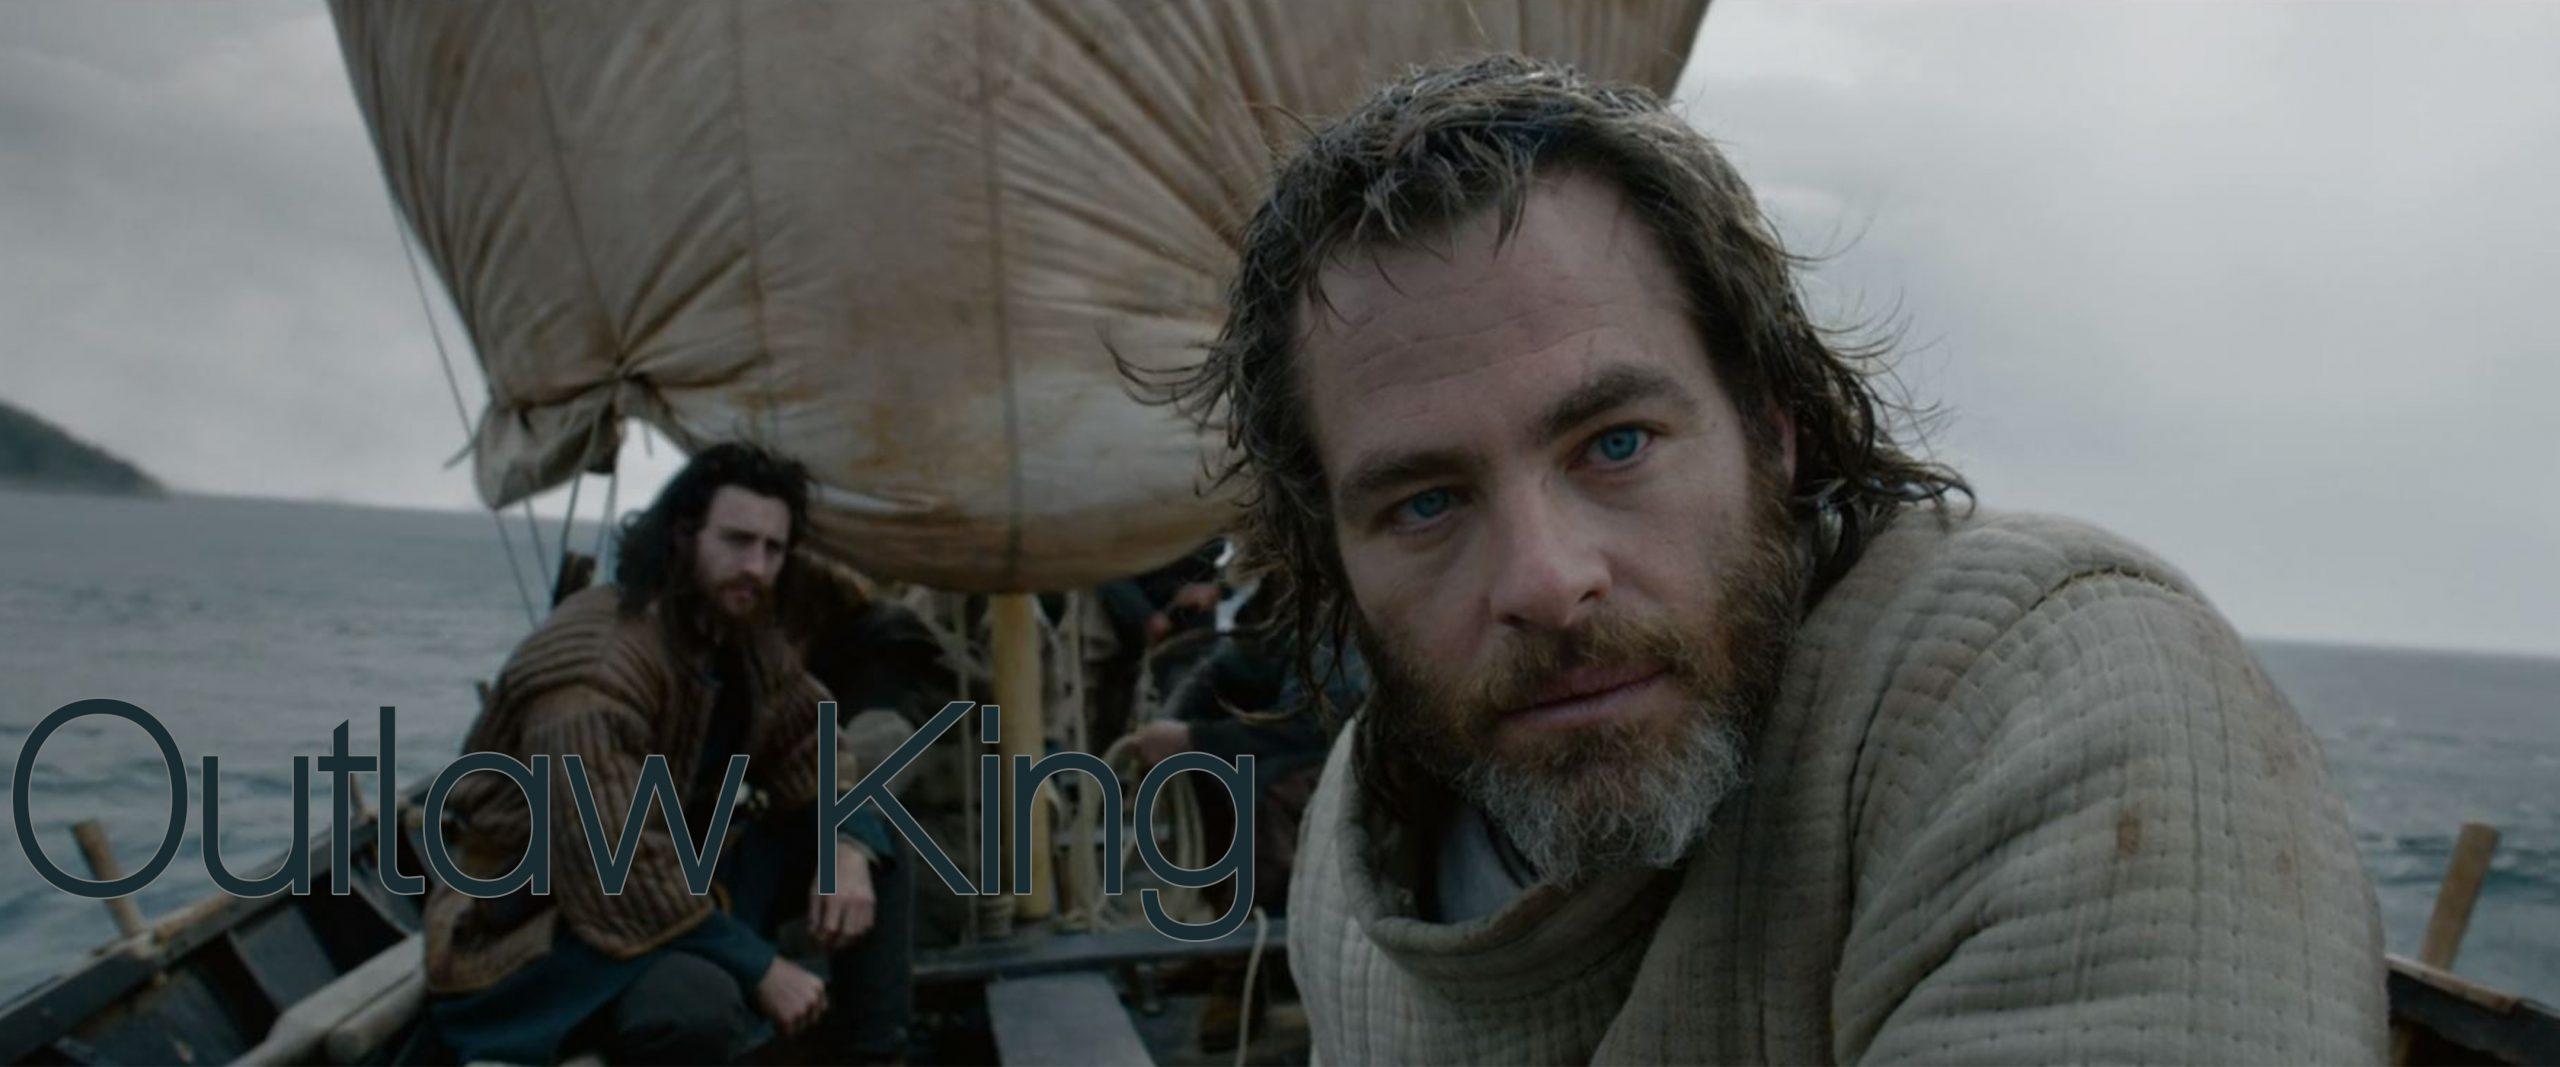 Outlaw King 1